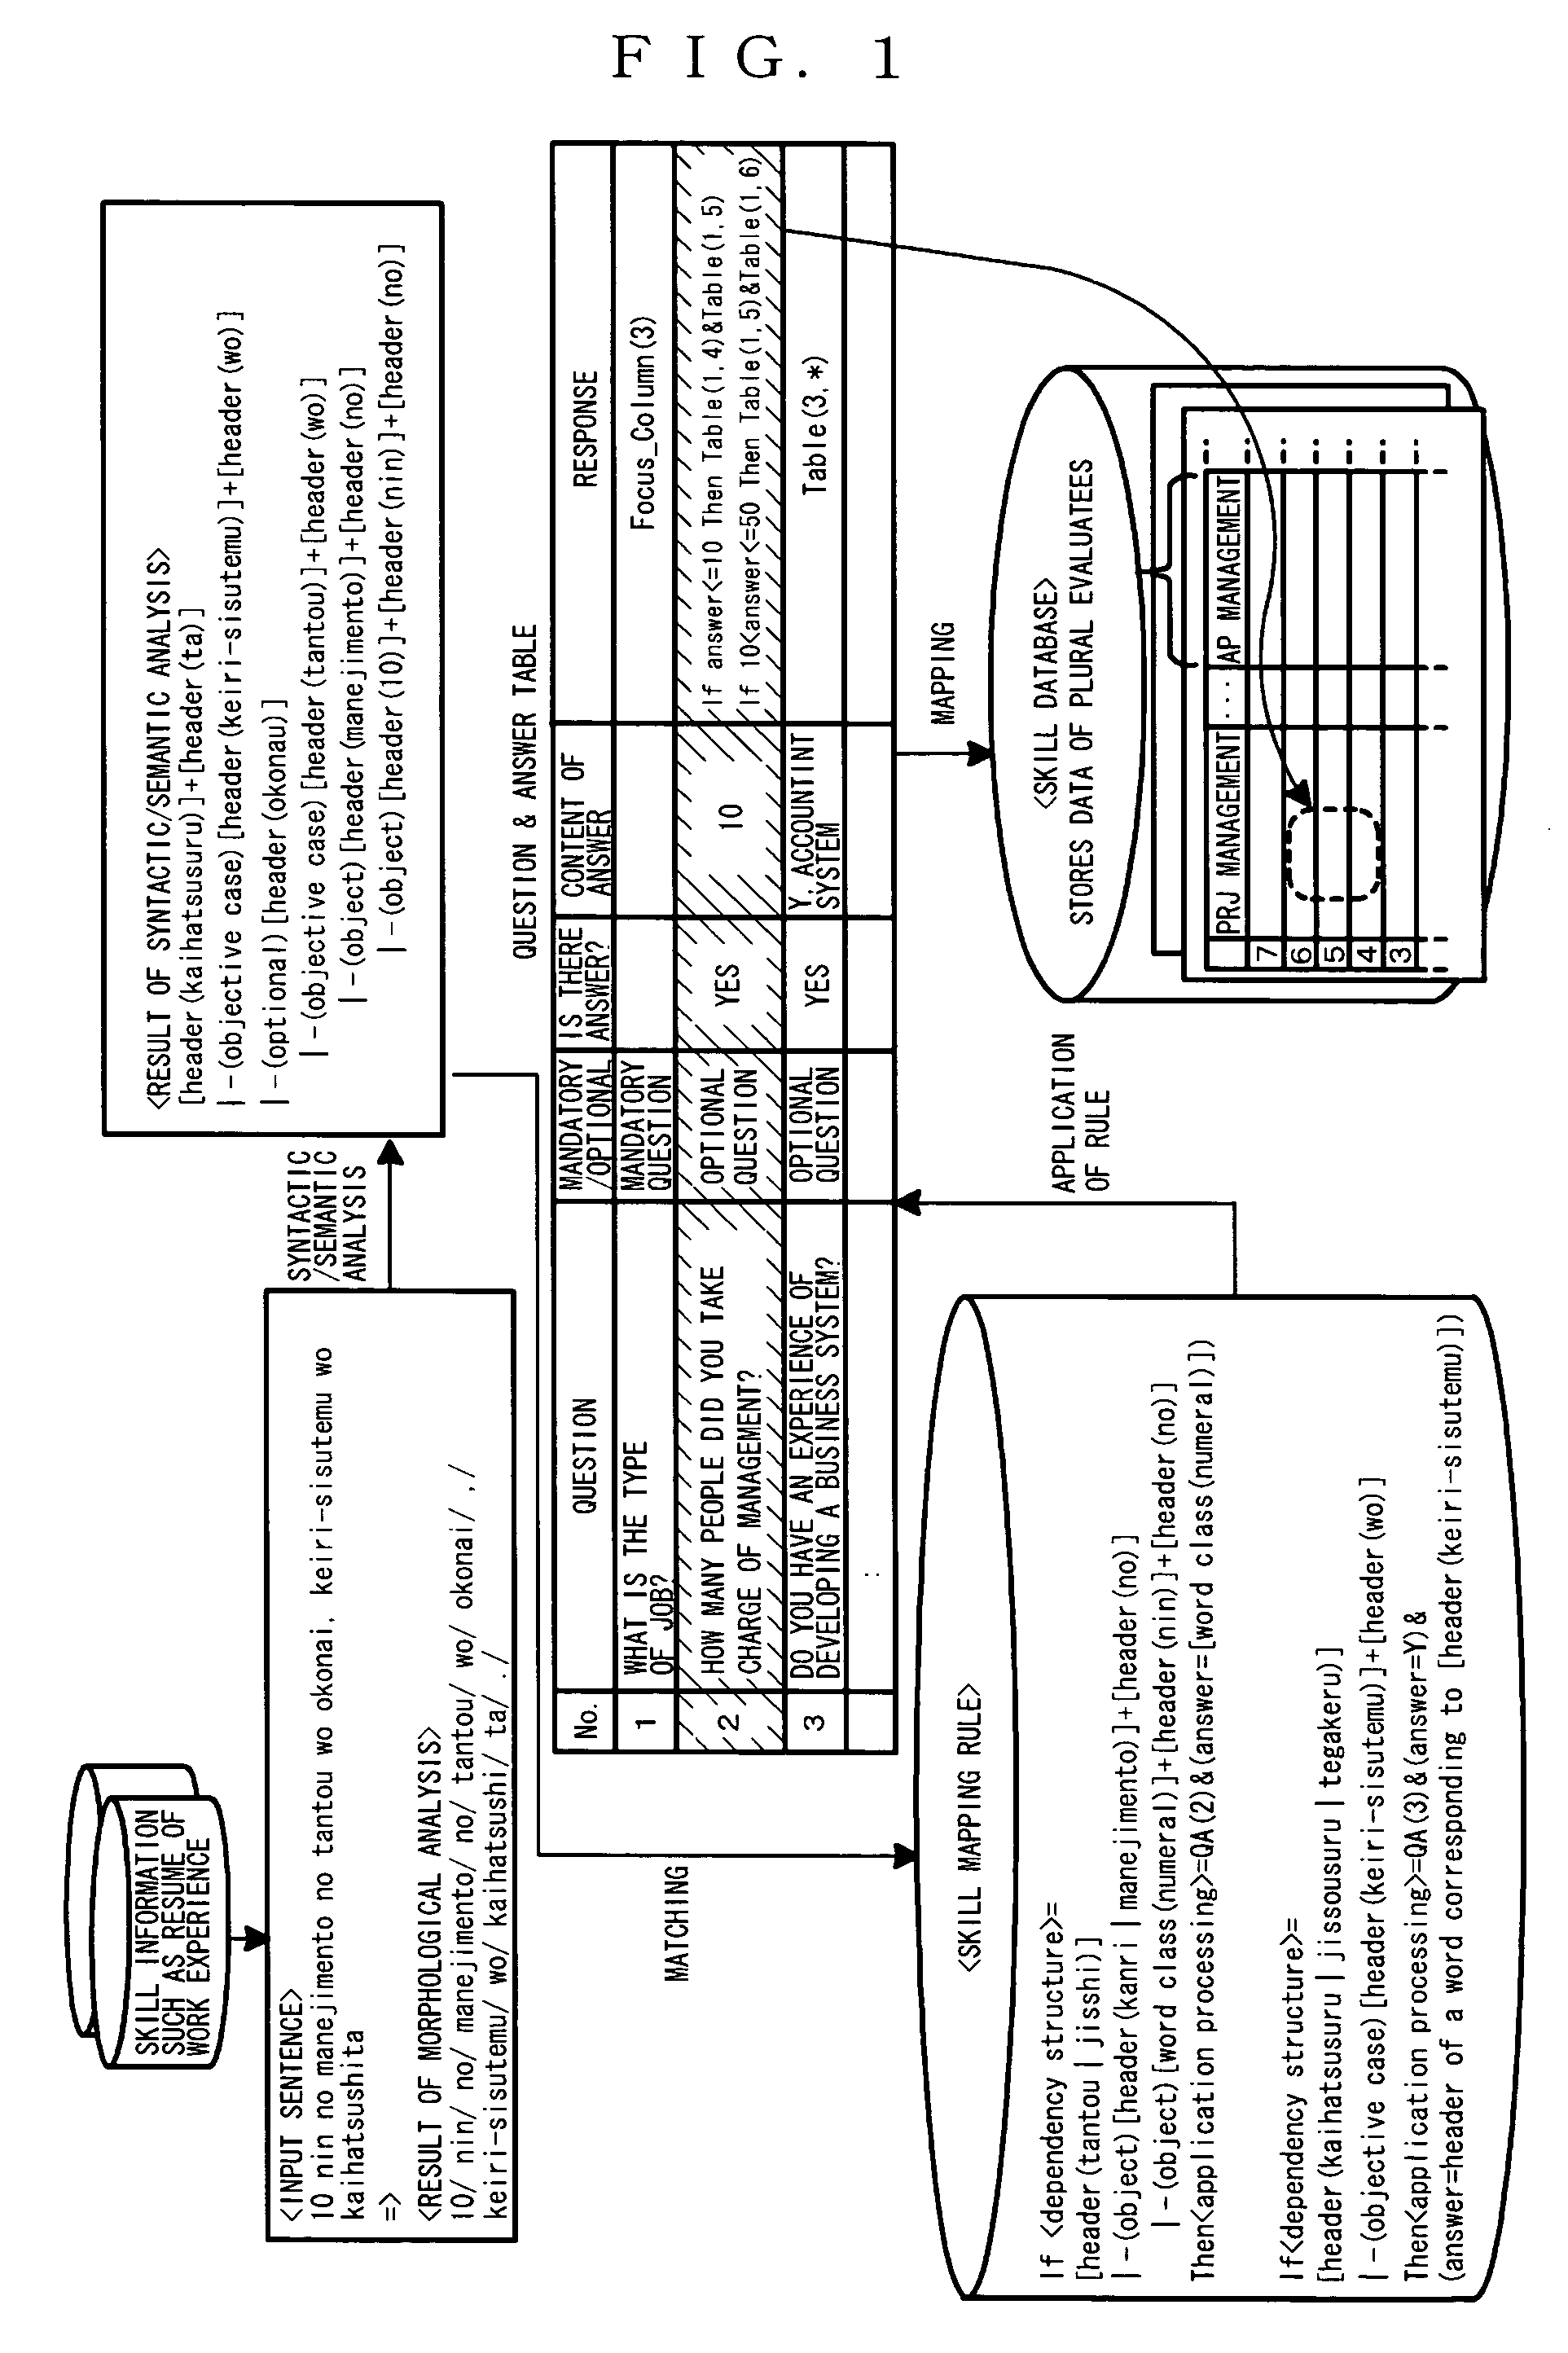 Apparatus for ability evaluation, method of evaluating ability, and computer program product for ability evaluation